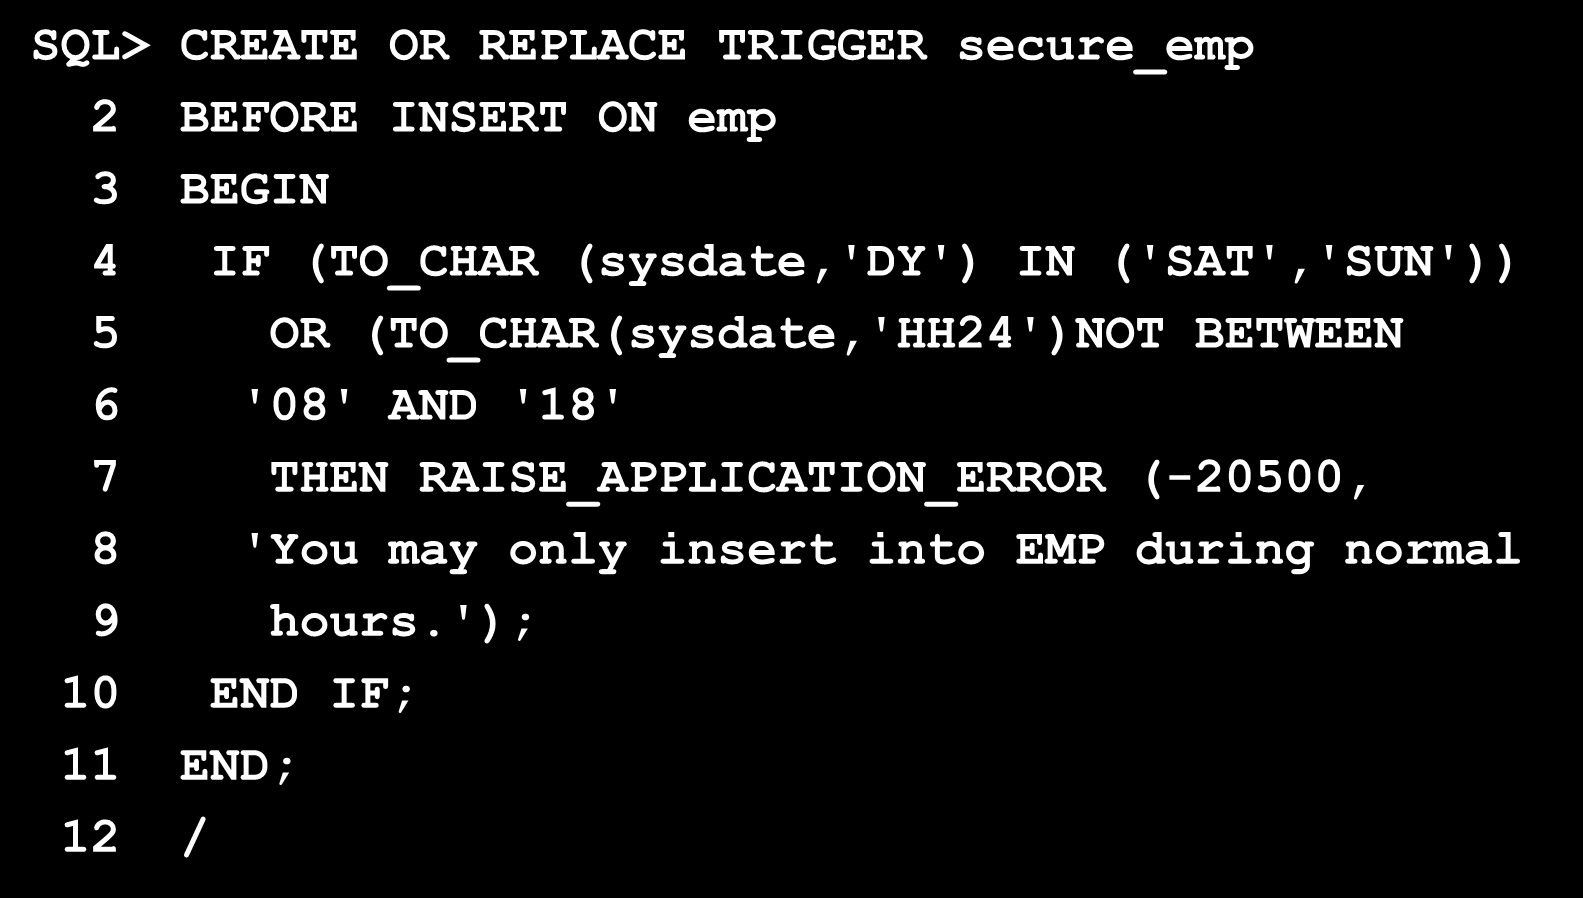 Befehlsorientierter BEFORE-Trigger Beispiel SQL> CREATE OR REPLACE TRIGGER secure_emp 2 BEFORE INSERT ON emp 3 BEGIN 4 IF (TO_CHAR (sysdate,'dy') IN ('SAT','SUN')) 5 OR